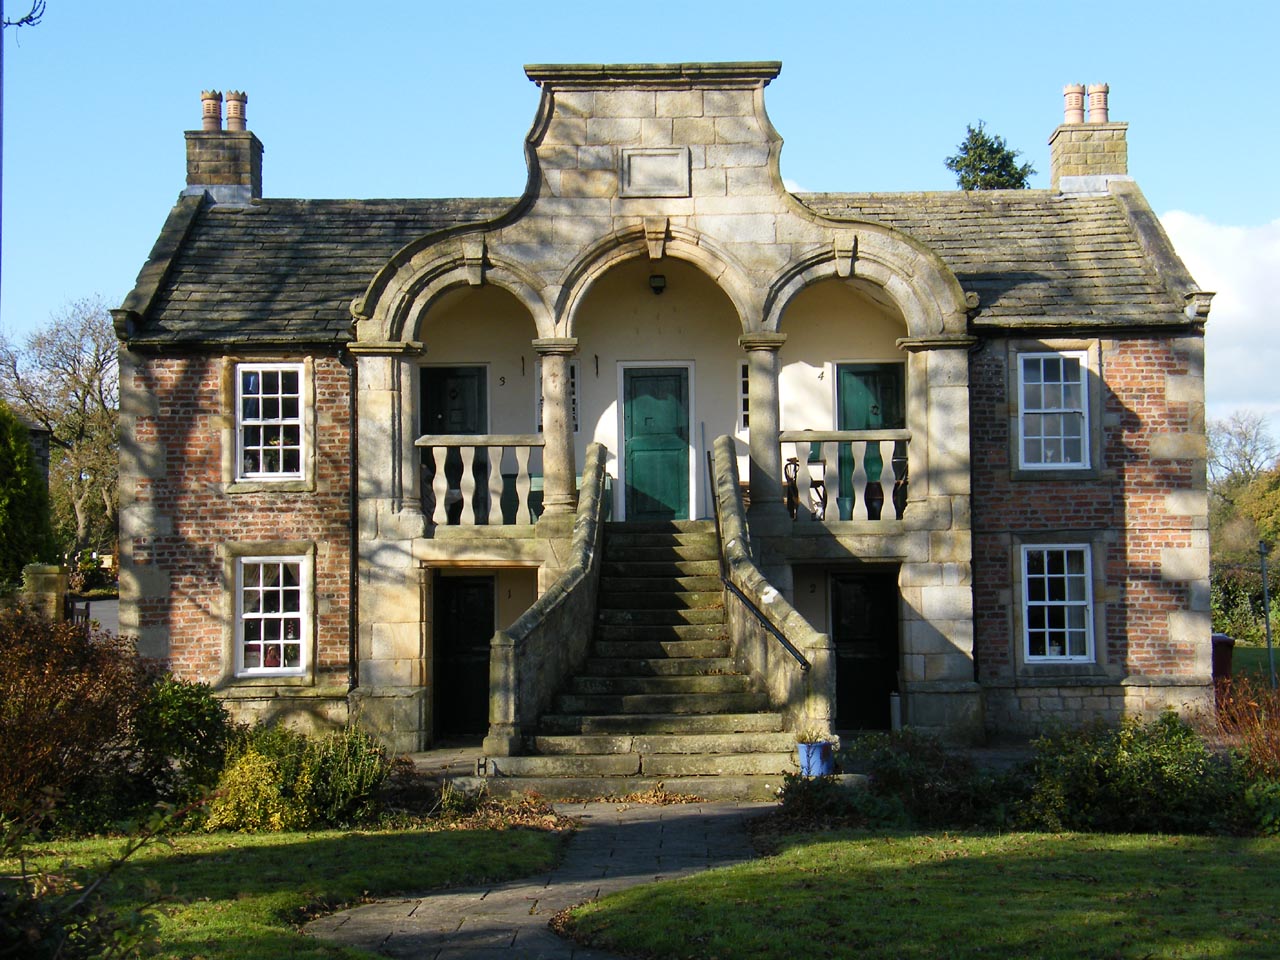 The Almshouse